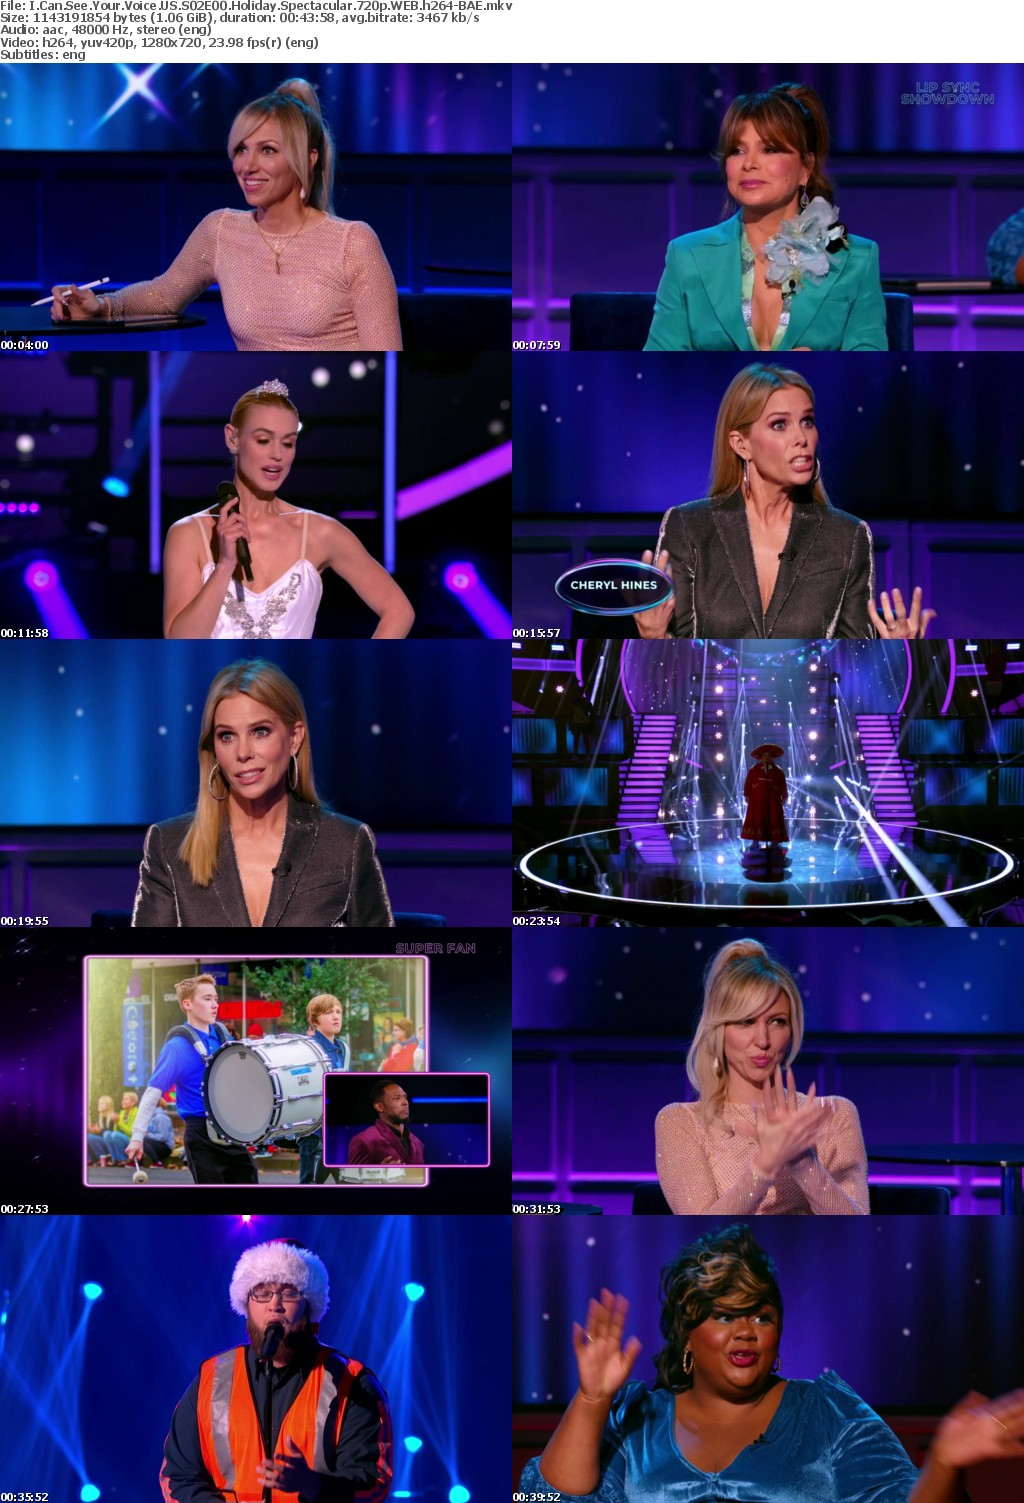 I Can See Your Voice US S02E00 Holiday Spectacular 720p WEB h264-BAE